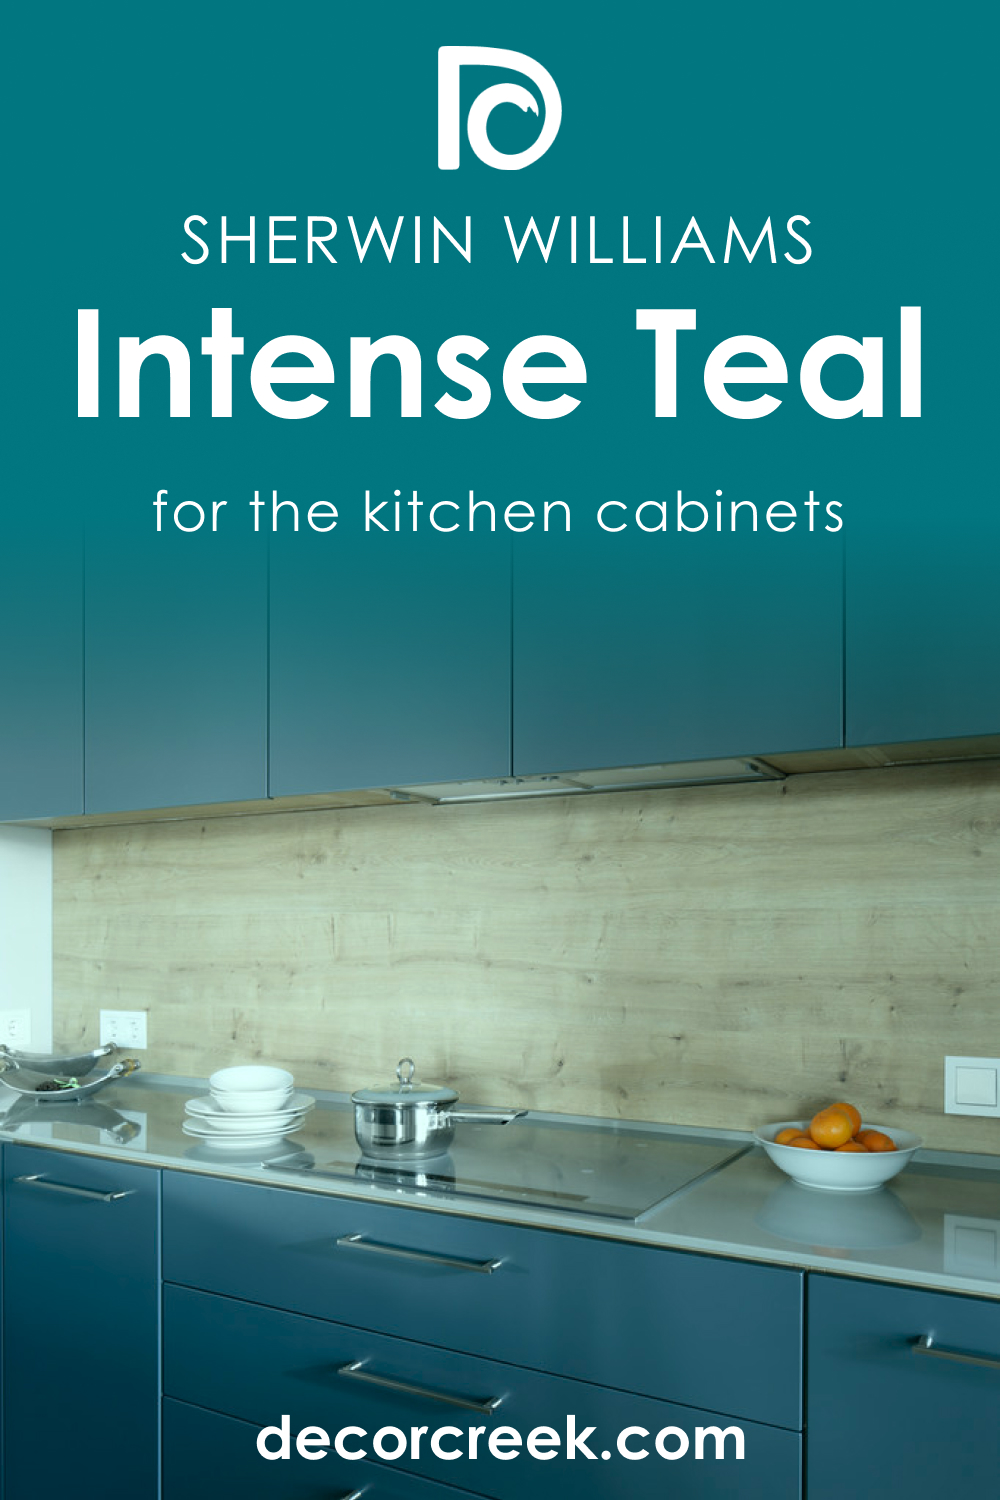 How to Use SW 6943 Intense Teal for the Kitchen Cabinets?